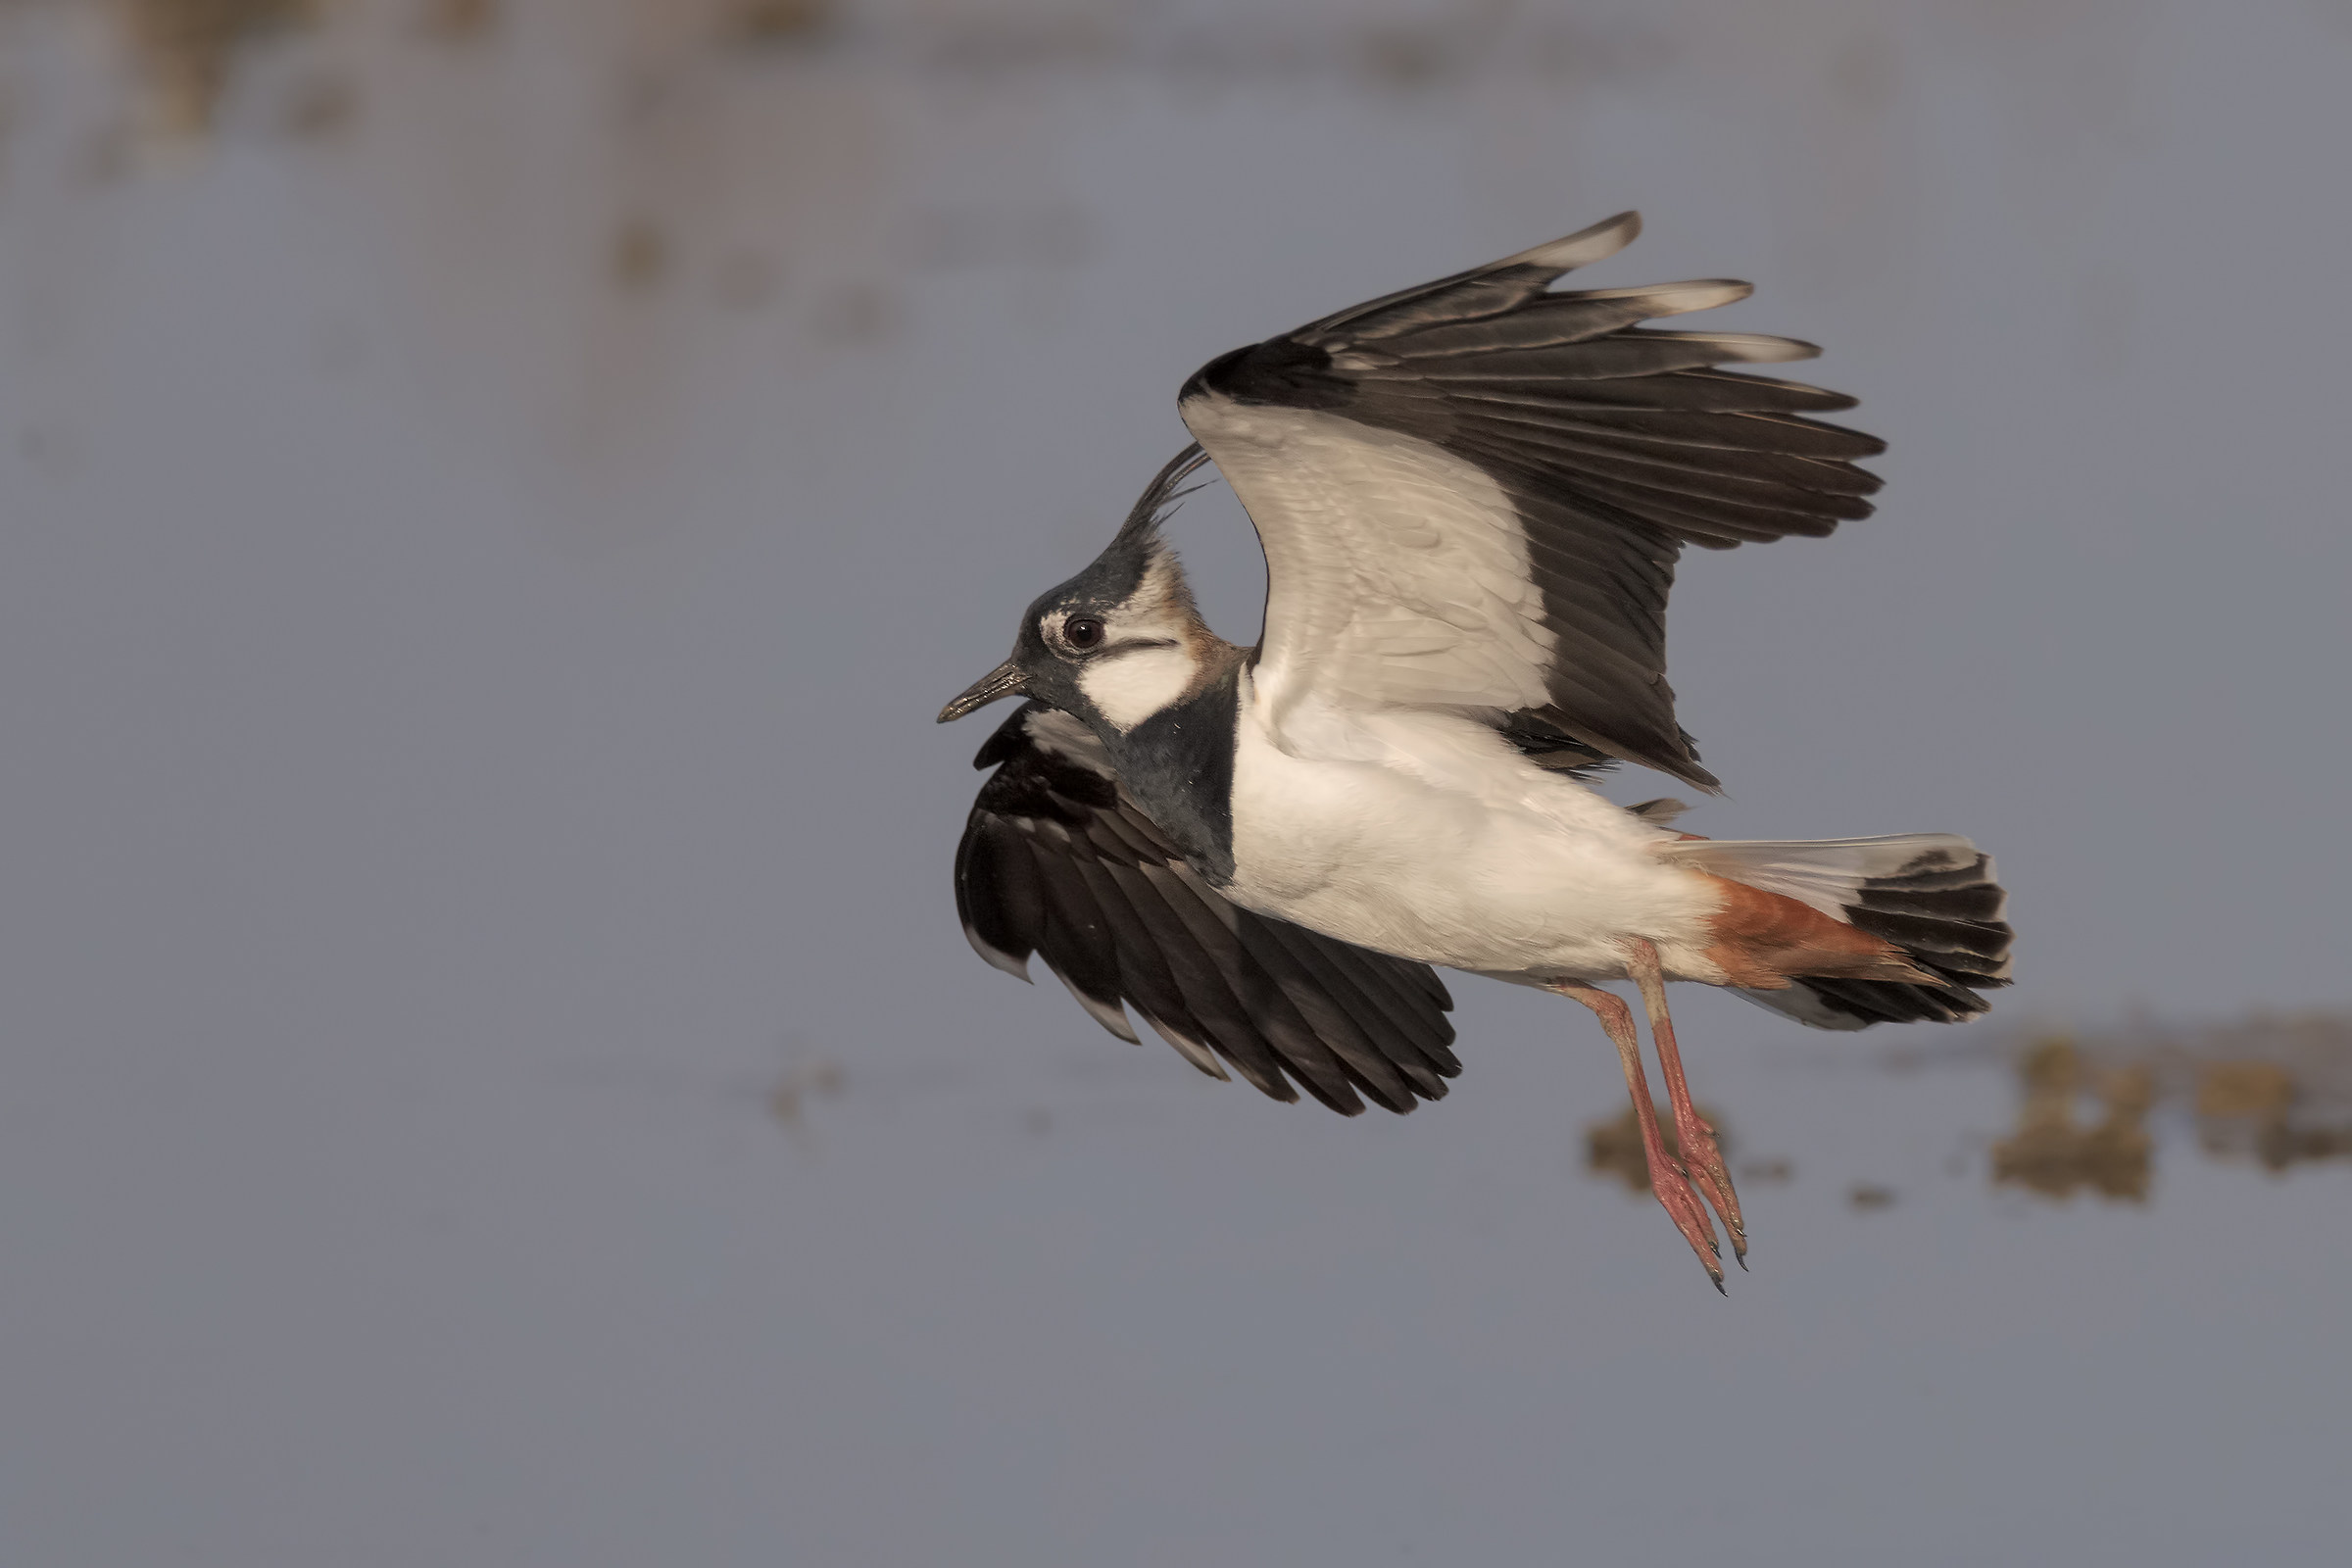 The flight of the lapwing...